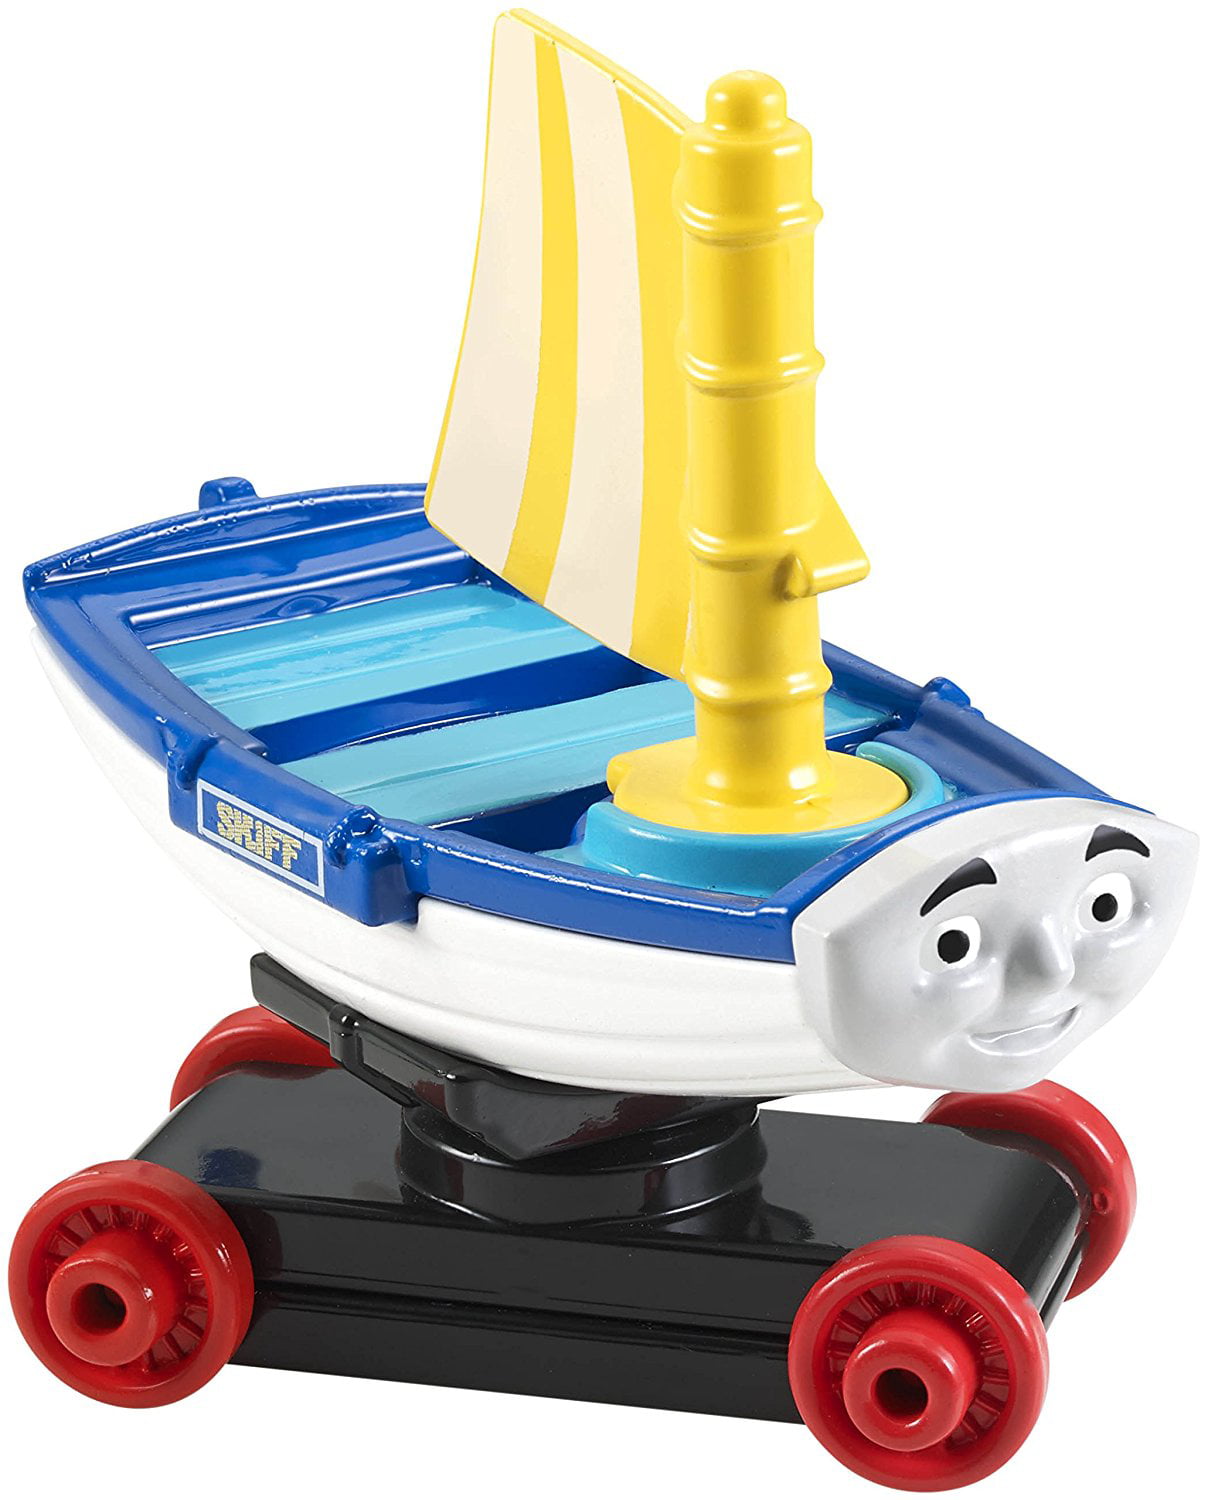 Stafford Fisher Price Y1102 Fisher-Price Thomas & Friends Take-n-Play 